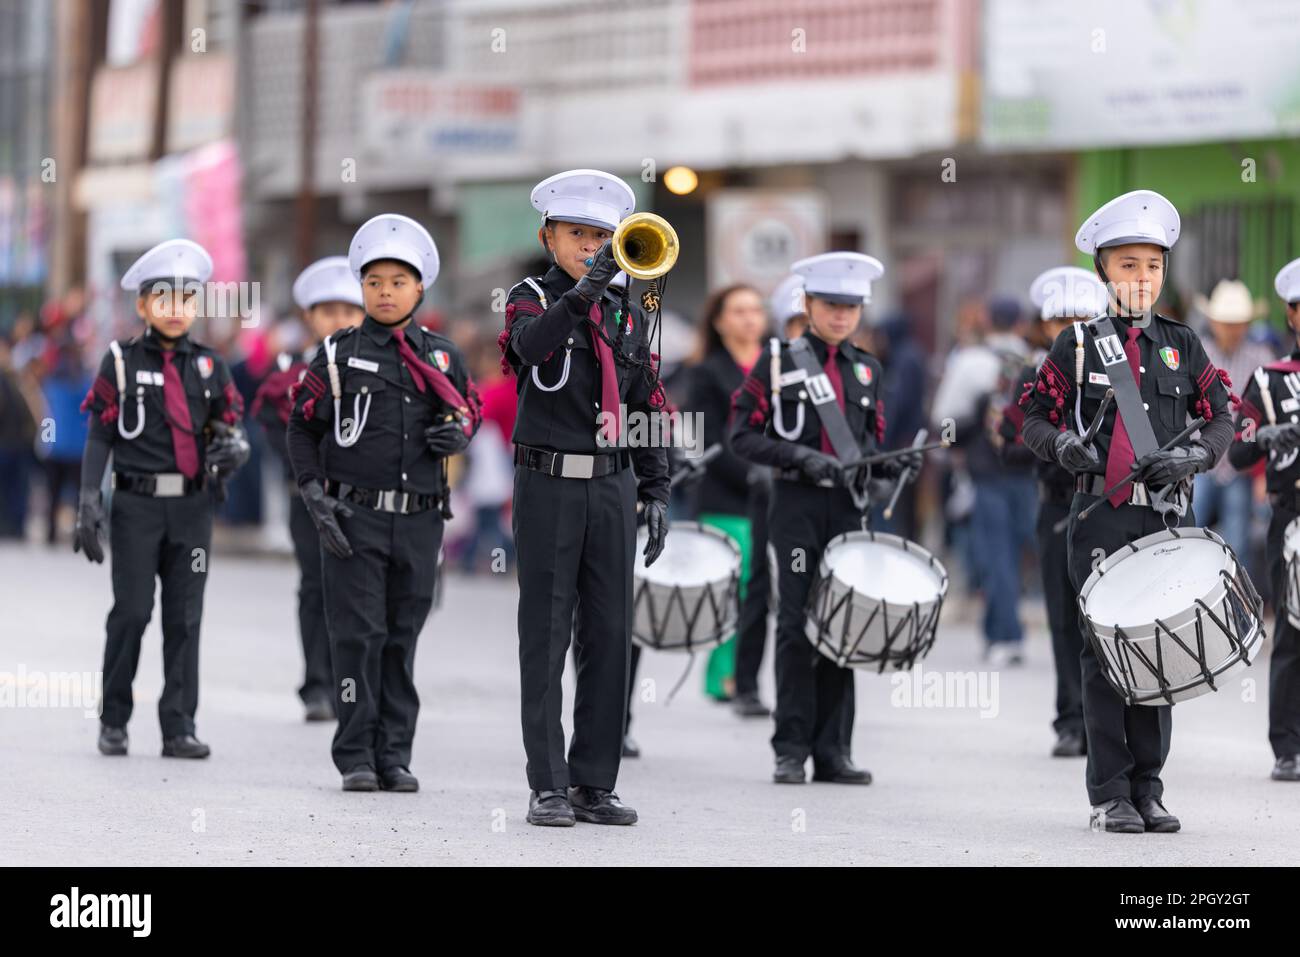 Valle Hermoso, Tamaulipas, Mexico - March 18, 2023: City Anniversary Parade, Marching Band from the 18 de Marzo, primary school, performing at the par Stock Photo